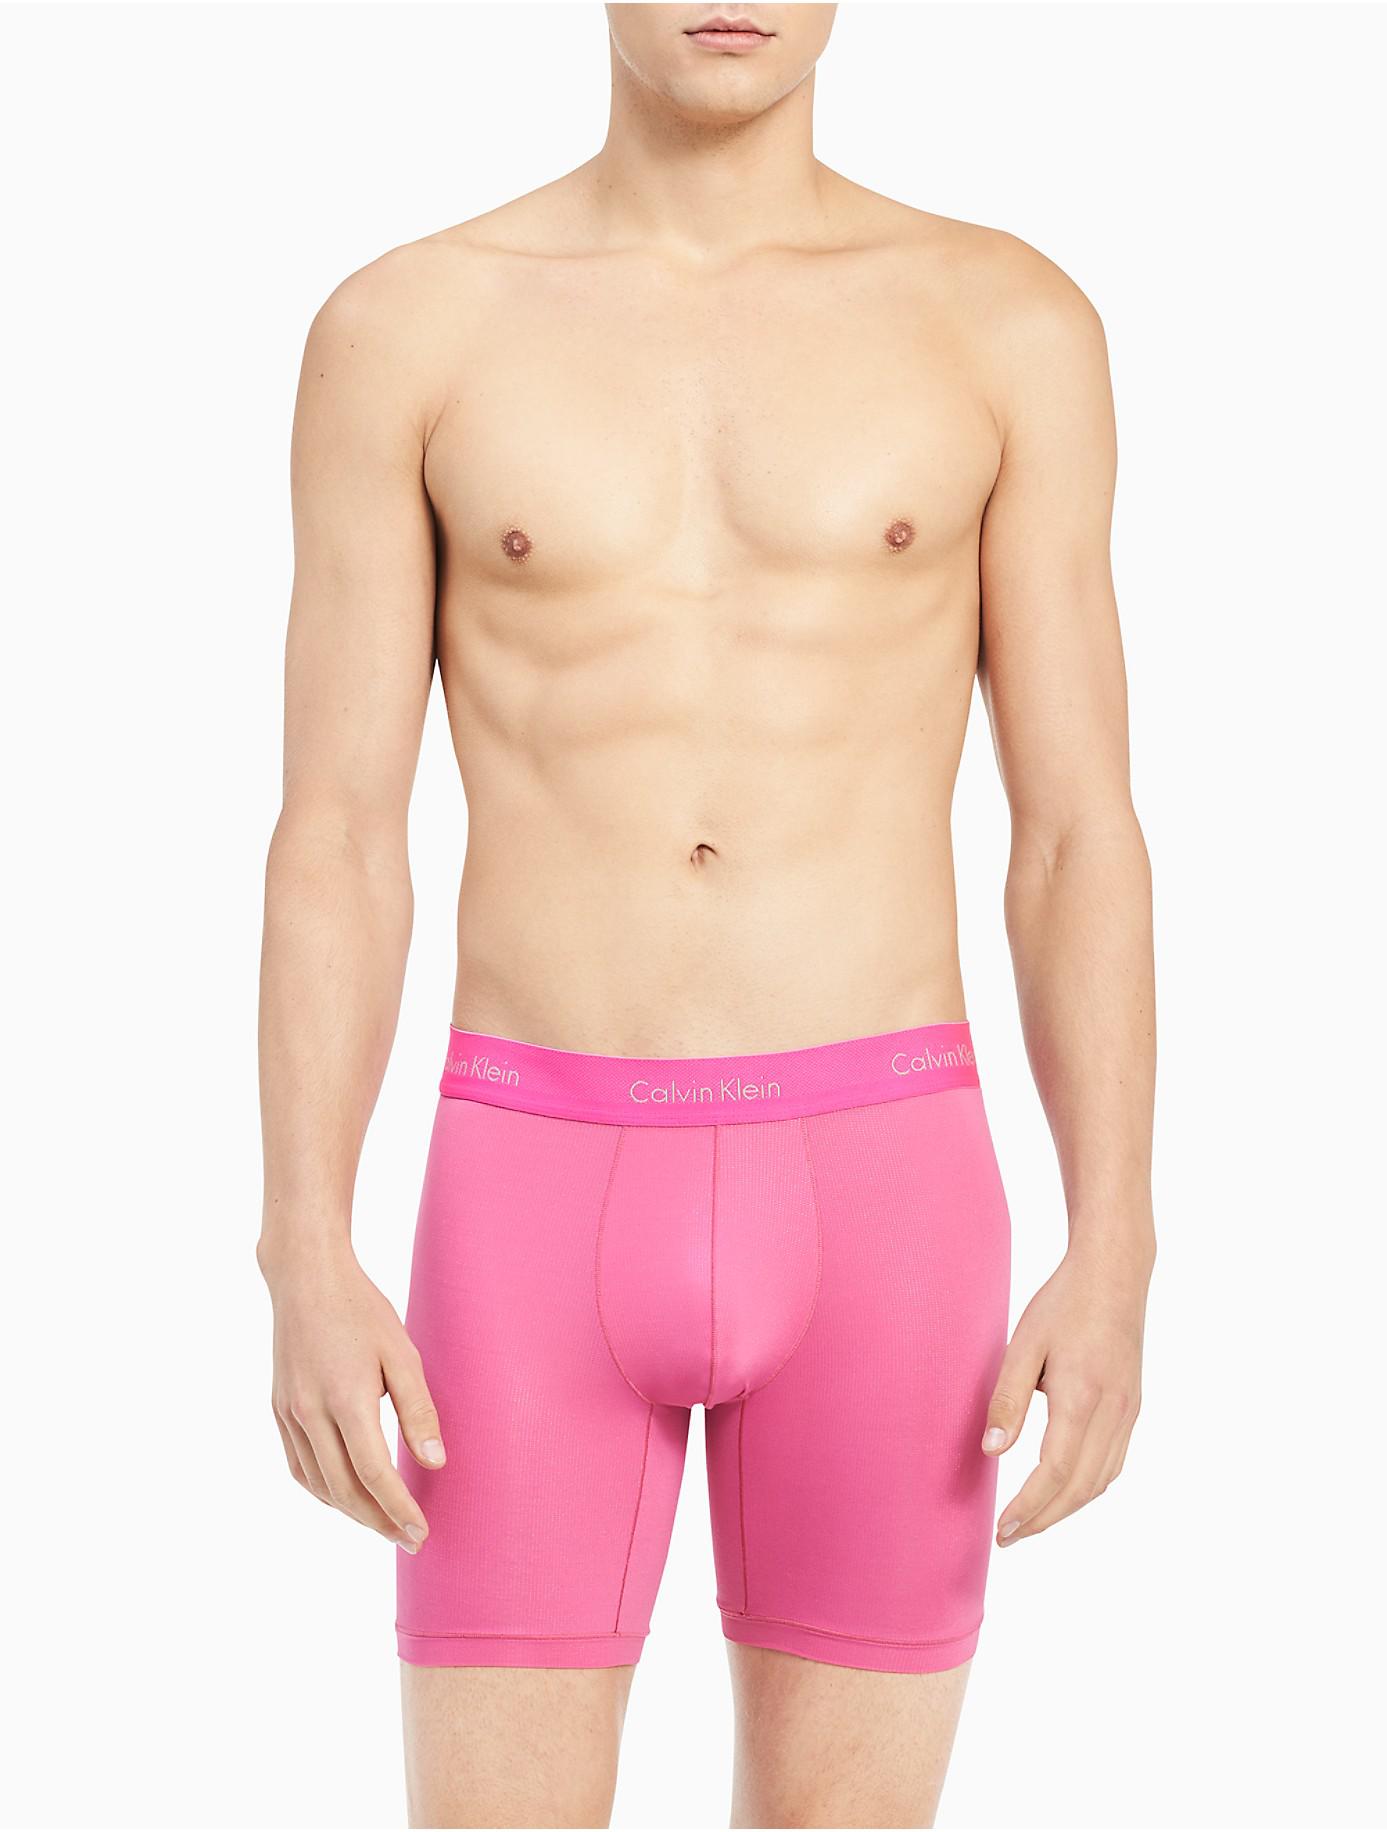 Calvin Klein Synthetic Boxer Briefs in Pink for Men - Lyst